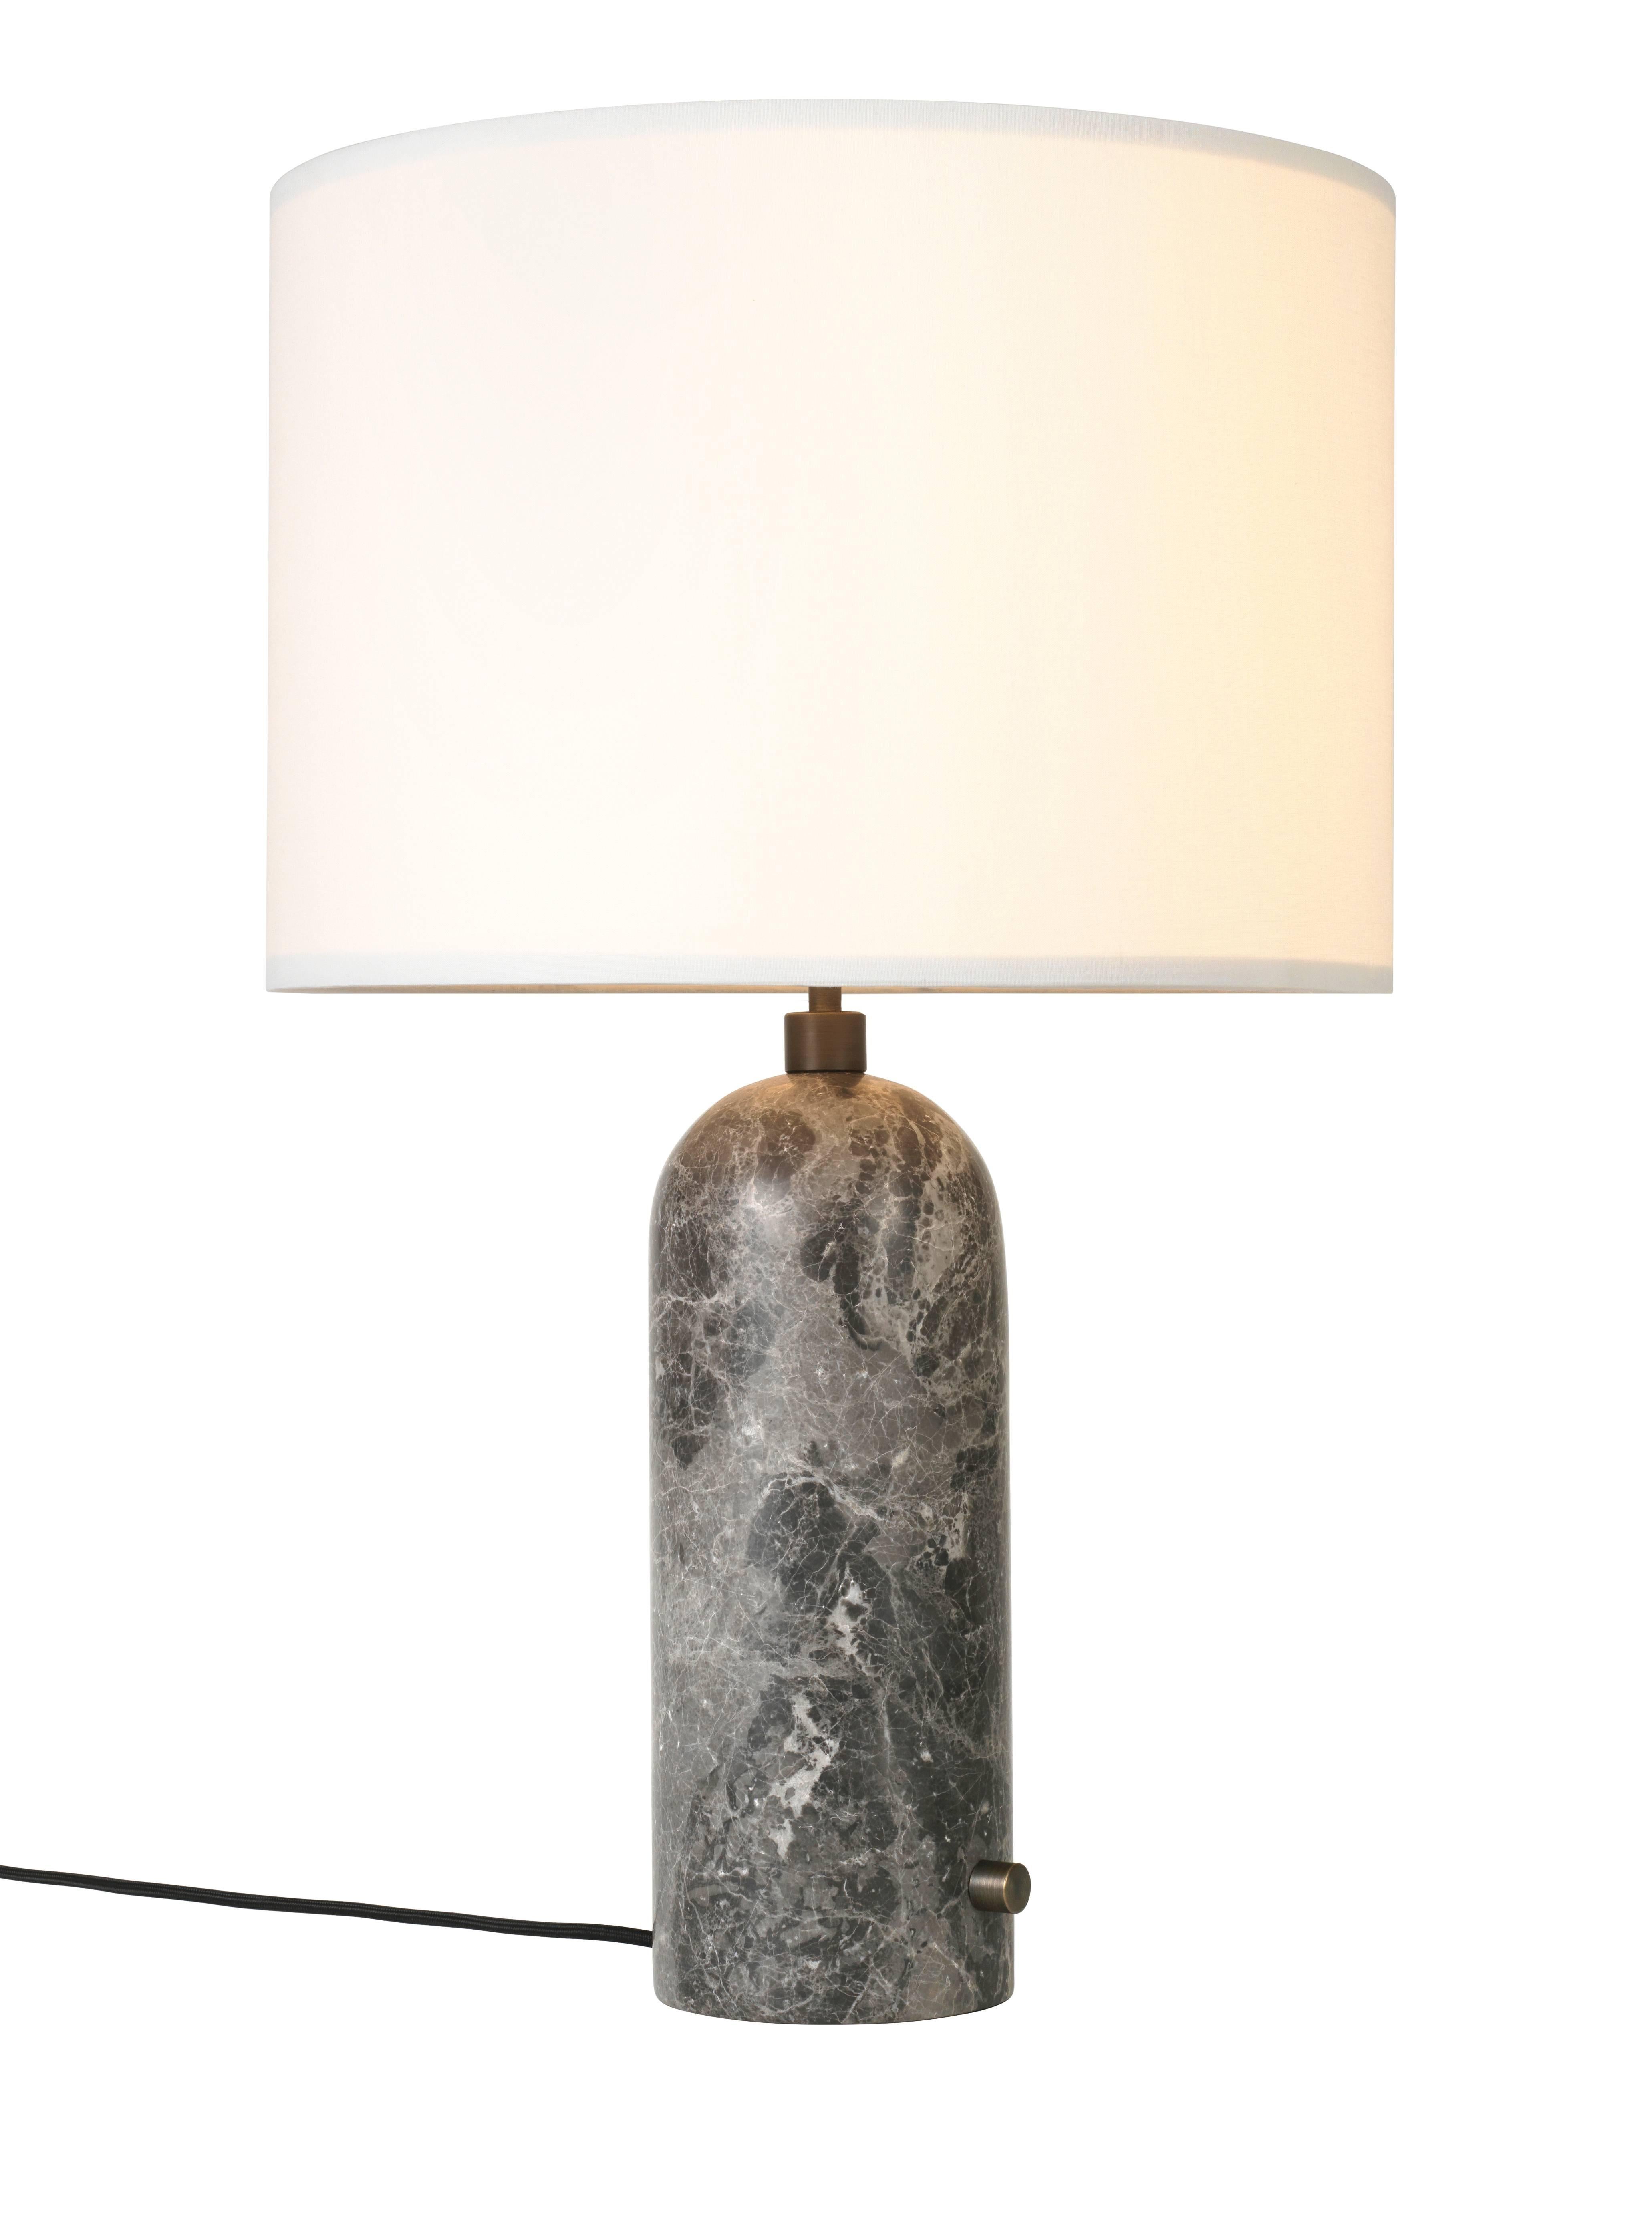 Gravity, grey marble table lamp 
Dimensions: 65 x 41 x 41 cm
Material: Marble
Designer: Louis Weisdorf
Produced by Gubi in Denmark.

The new Gravity collection designed by Space
Copenhagen, consisting of a table lamp and a floor
lamp, is